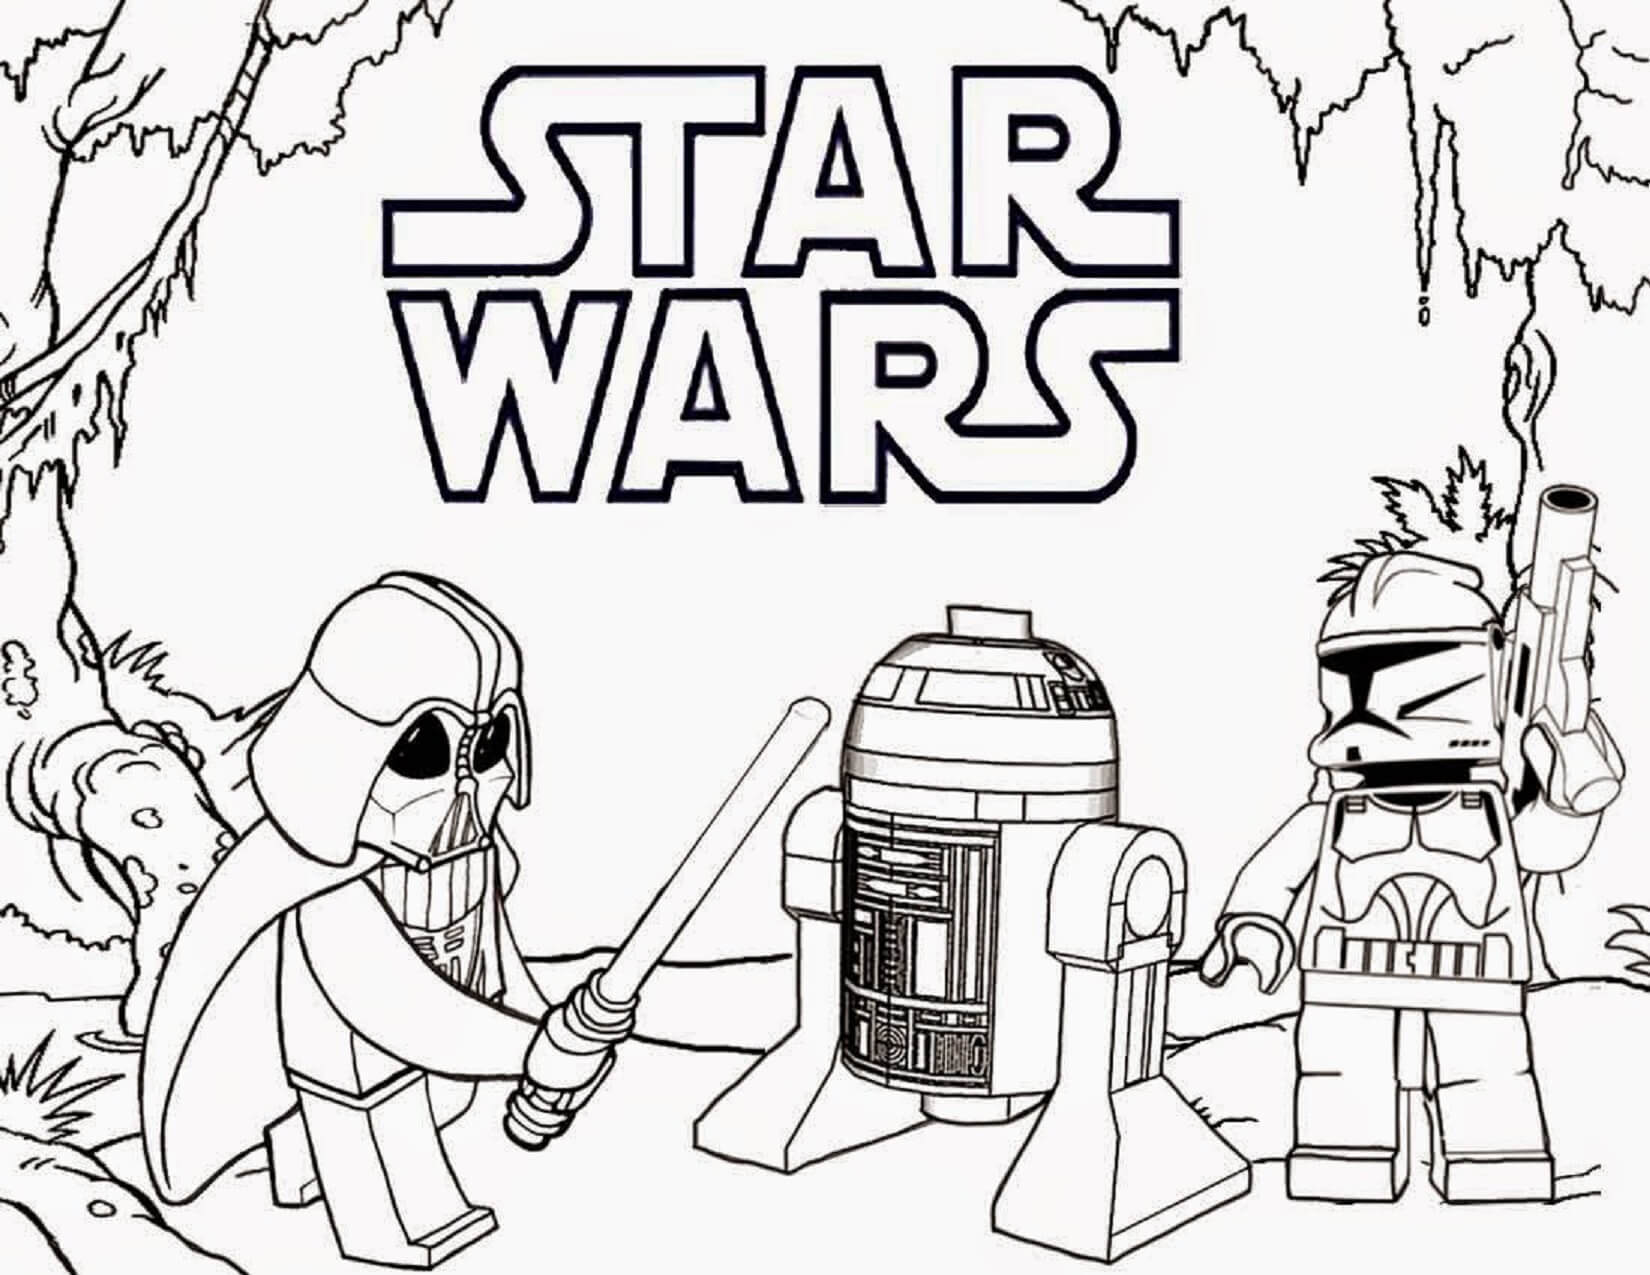 Star Wars Lego coloring page